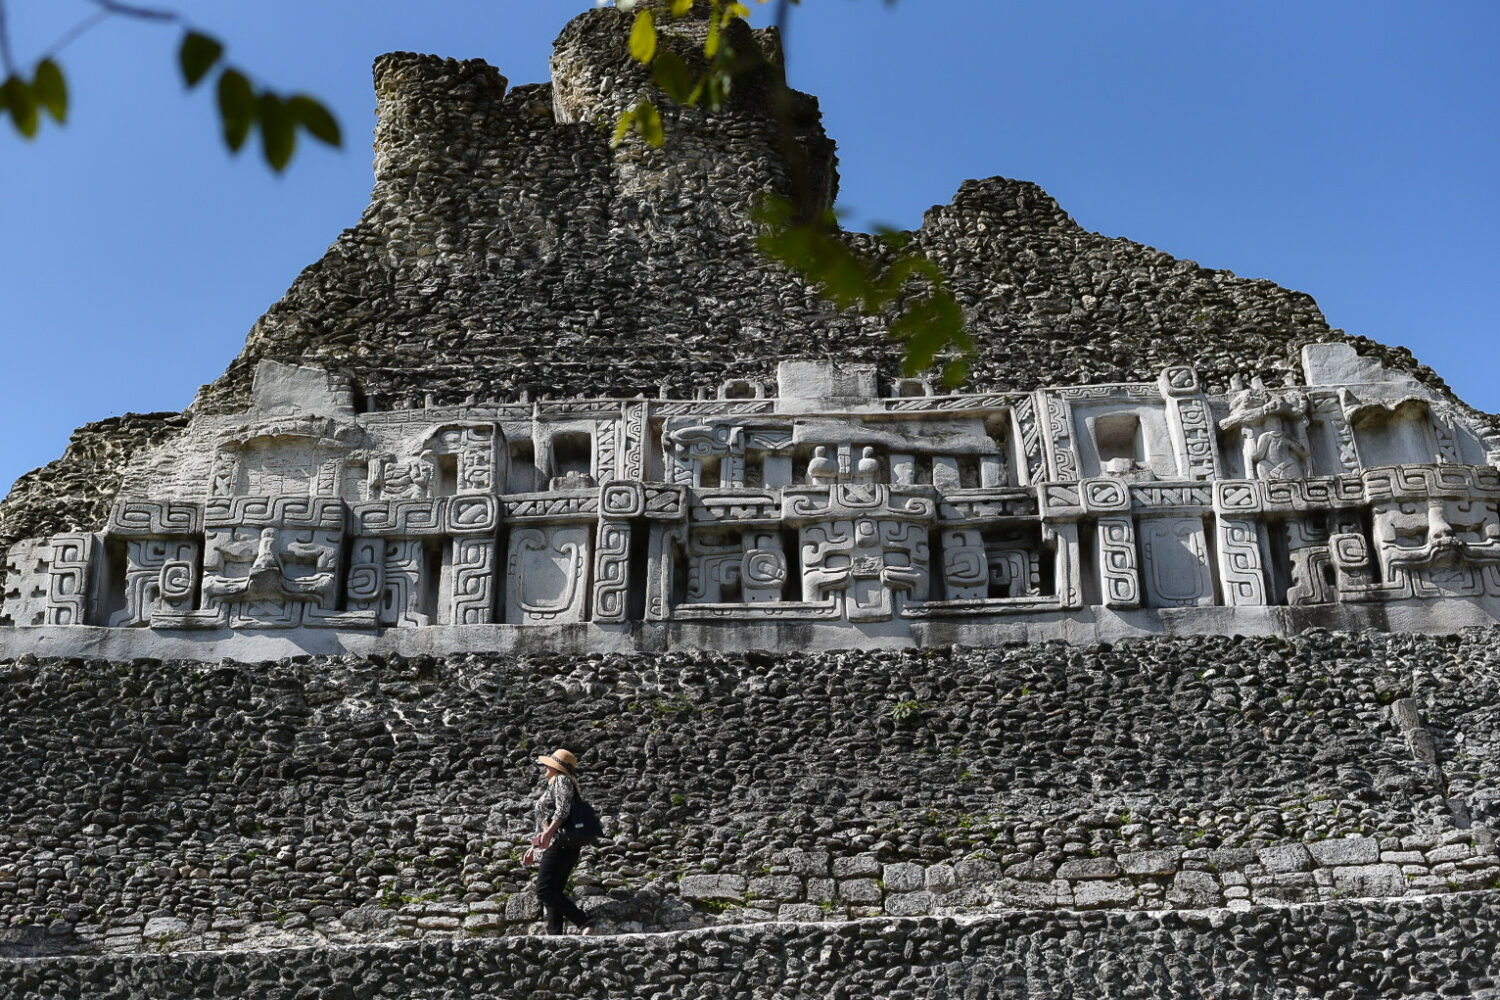 A frieze replicated artifact depicting gods and monsters. At the foot of “El Castillo,” name given to this mammoth of a structure, is where the ghost of the stone maiden, Xunantunich, was encountered by nearby villagers in early 1800.